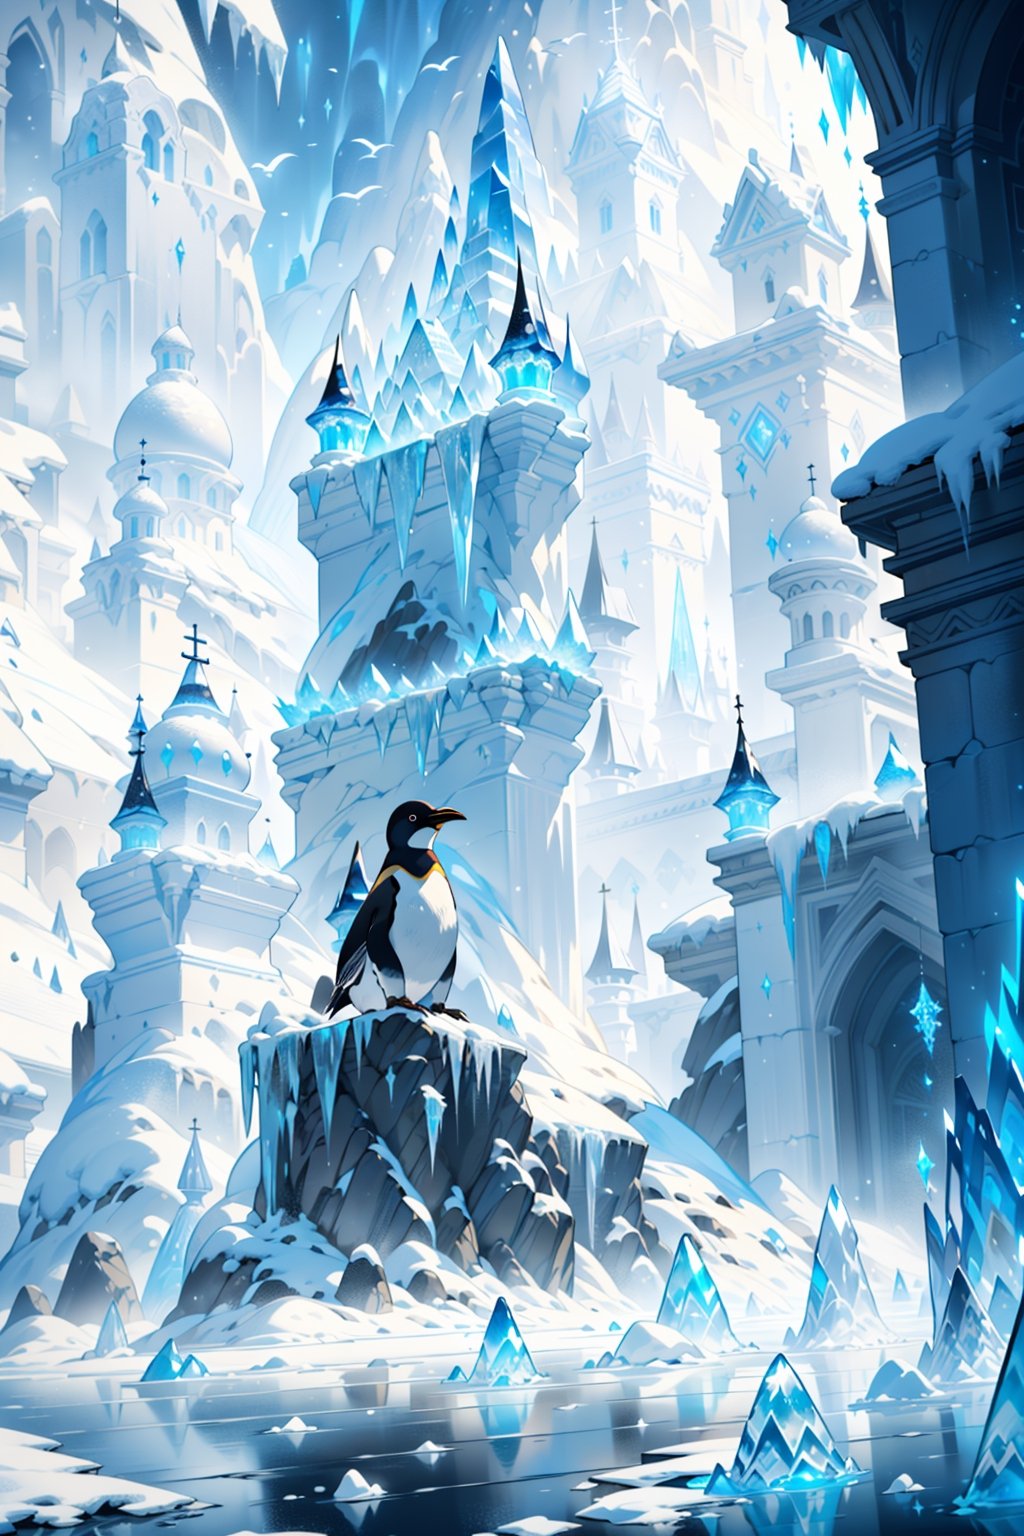 vibrant colors, female, masterpiece, sharp focus, best quality, depth of field, cinematic lighting, ((solo, landscape )), (illustration, 8k CG, (extremely detailed), masterpiece, ultra-detailed, **Title:** "Ice Cream Kingdom"

The painting offers a magical glimpse of a frozen landscape, where ice dominates the scene in all its forms. Immense spikes of ice rise towards the sky, creating a surreal and majestic perspective. In the distance, frost-carved buildings stand like monuments in the frozen earth.

The penguins move gracefully through the frozen water, creating a fascinating contrast between their dark plumage and the surrounding ice world. The sunlight reflects on the frozen surfaces, creating plays of light and shadow that make the landscape even more evocative.

In this "Frozen Kingdom", the coldness of the environment mixes with the disturbing beauty of the ice, transmitting a sensation of quiet and majesty typical of a world where the cold reigns supreme.